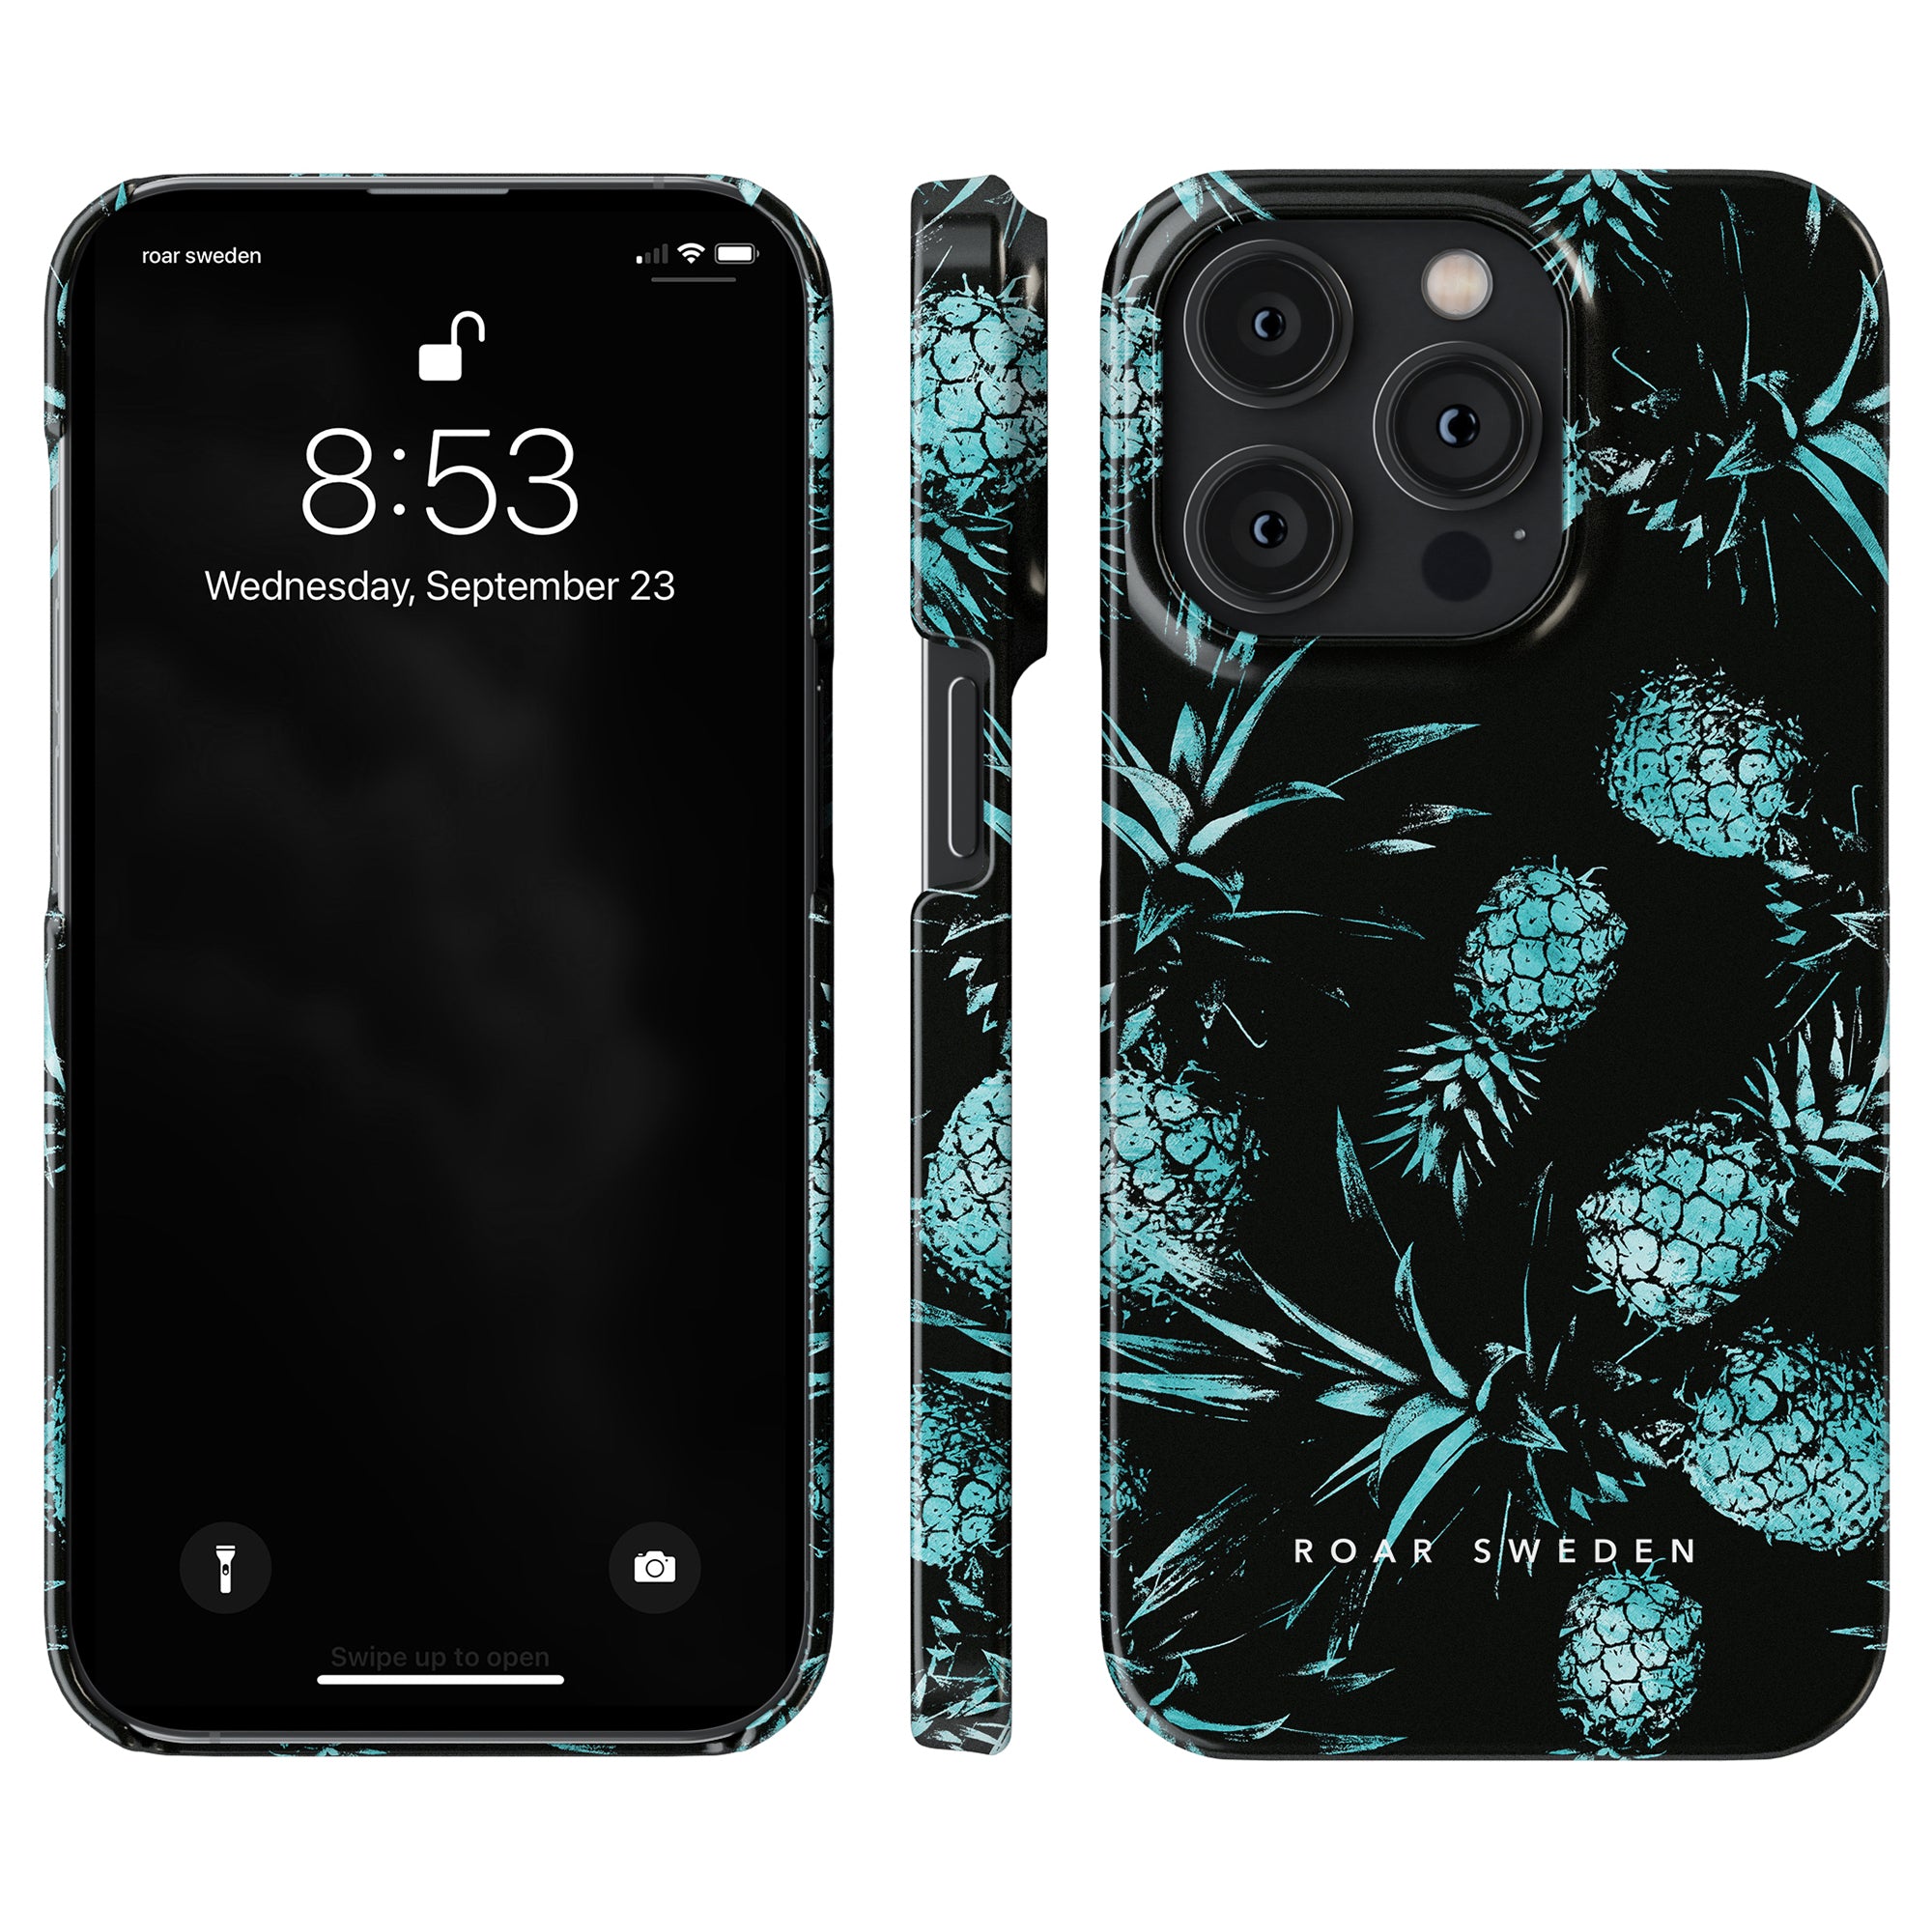 A smartphone and its Turquoise Pineapples - Slim case. The time on the screen is 8:53 on Wednesday, September 23. The words "ROAR SWEDEN" are visible on the case from the Exotic Collection.